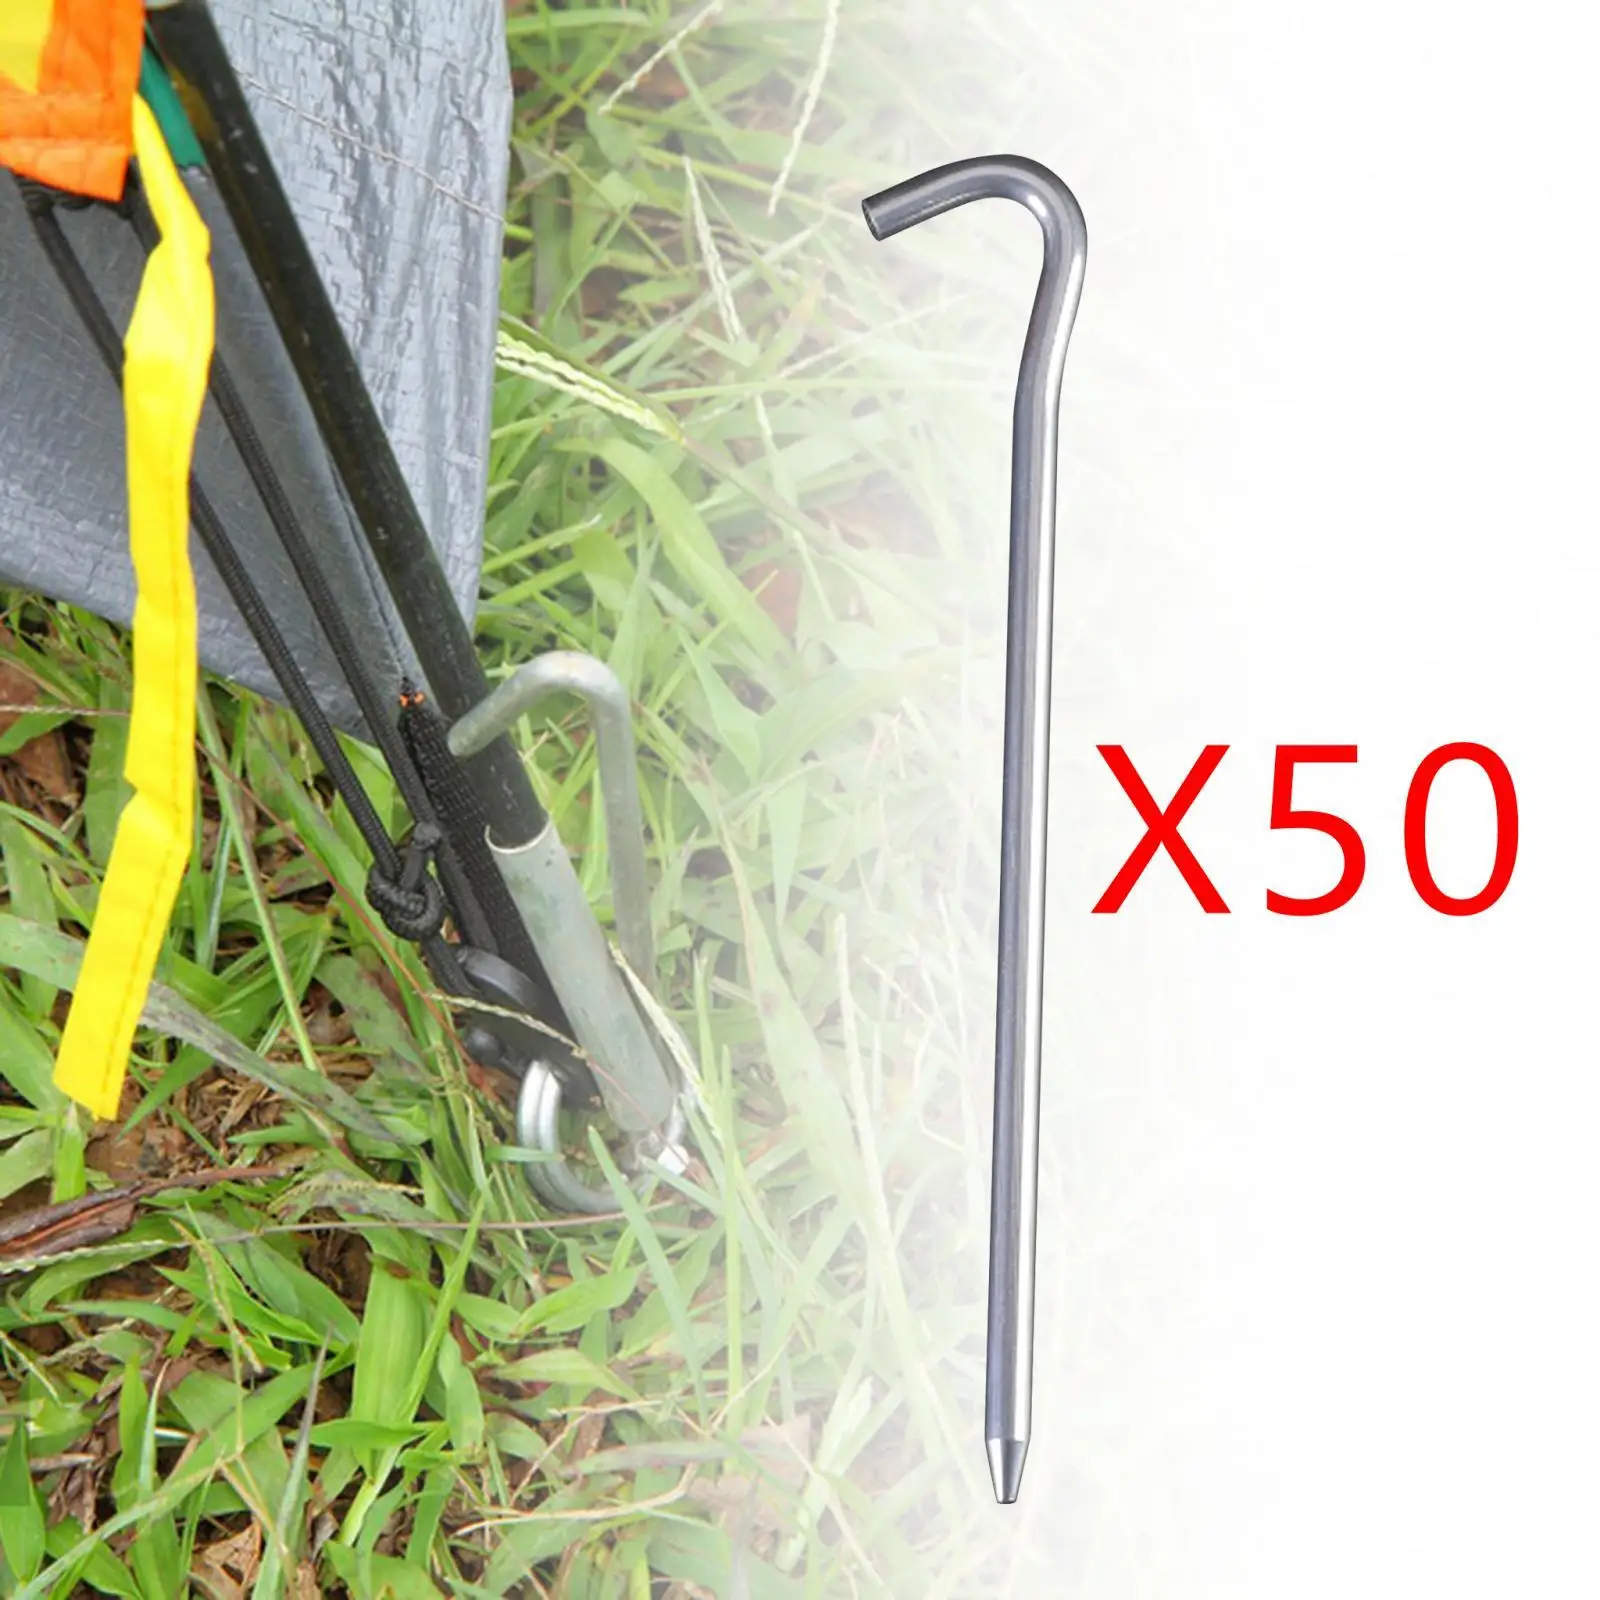 Pack of 50 Tent Pegs Nails 7inch Aluminum Alloy Rust Resistance for Fences, Mats, Football Nets Versatile Ground Spikes Sturdy